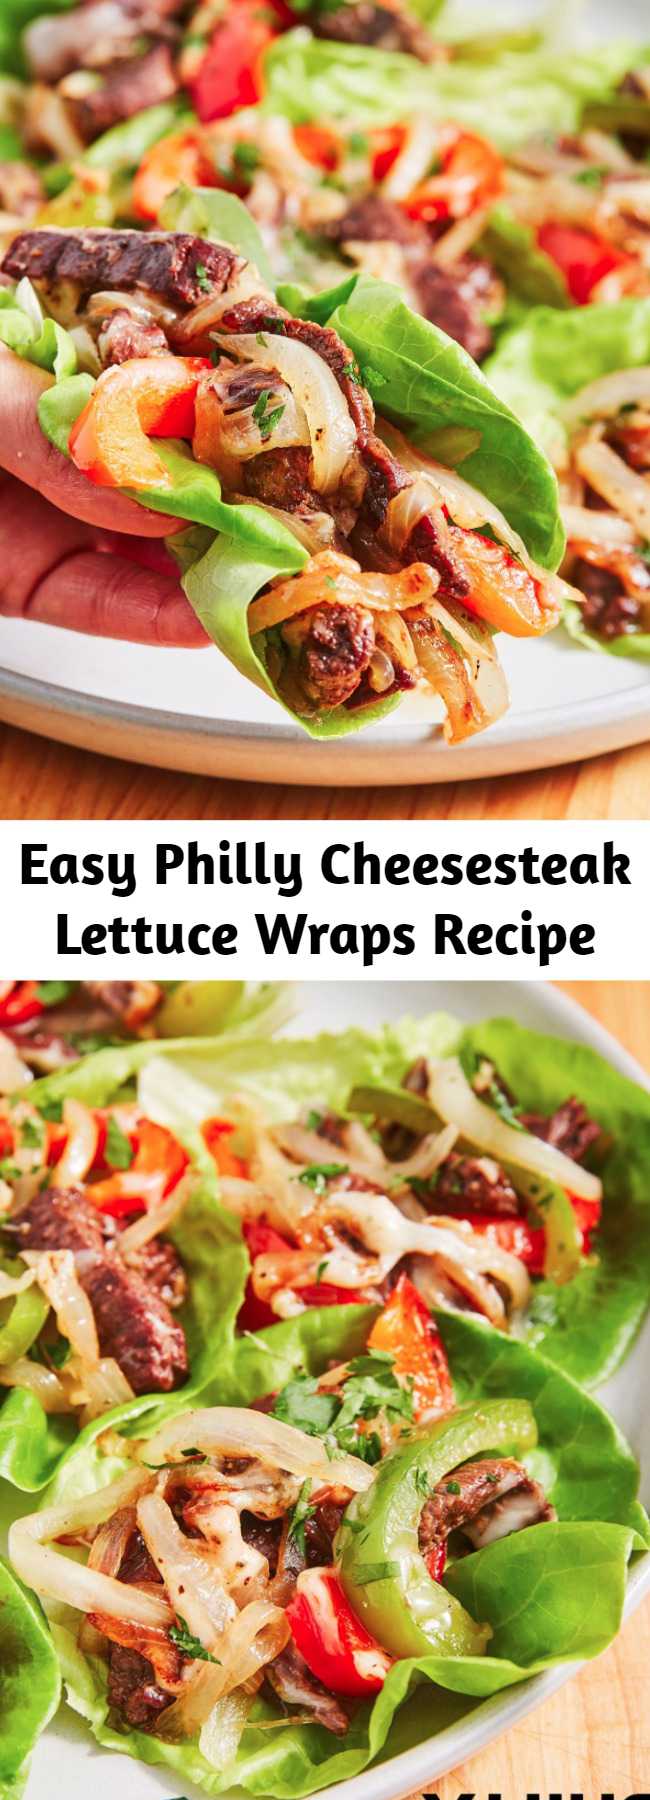 Easy Philly Cheesesteak Lettuce Wraps Recipe - You won't miss the hoagie in these low-carb Philly Cheesesteak lettuce wraps. Make your favorite sandwich without the carbs. #food #healthyeating #gf #glutenfree #easyrecipe